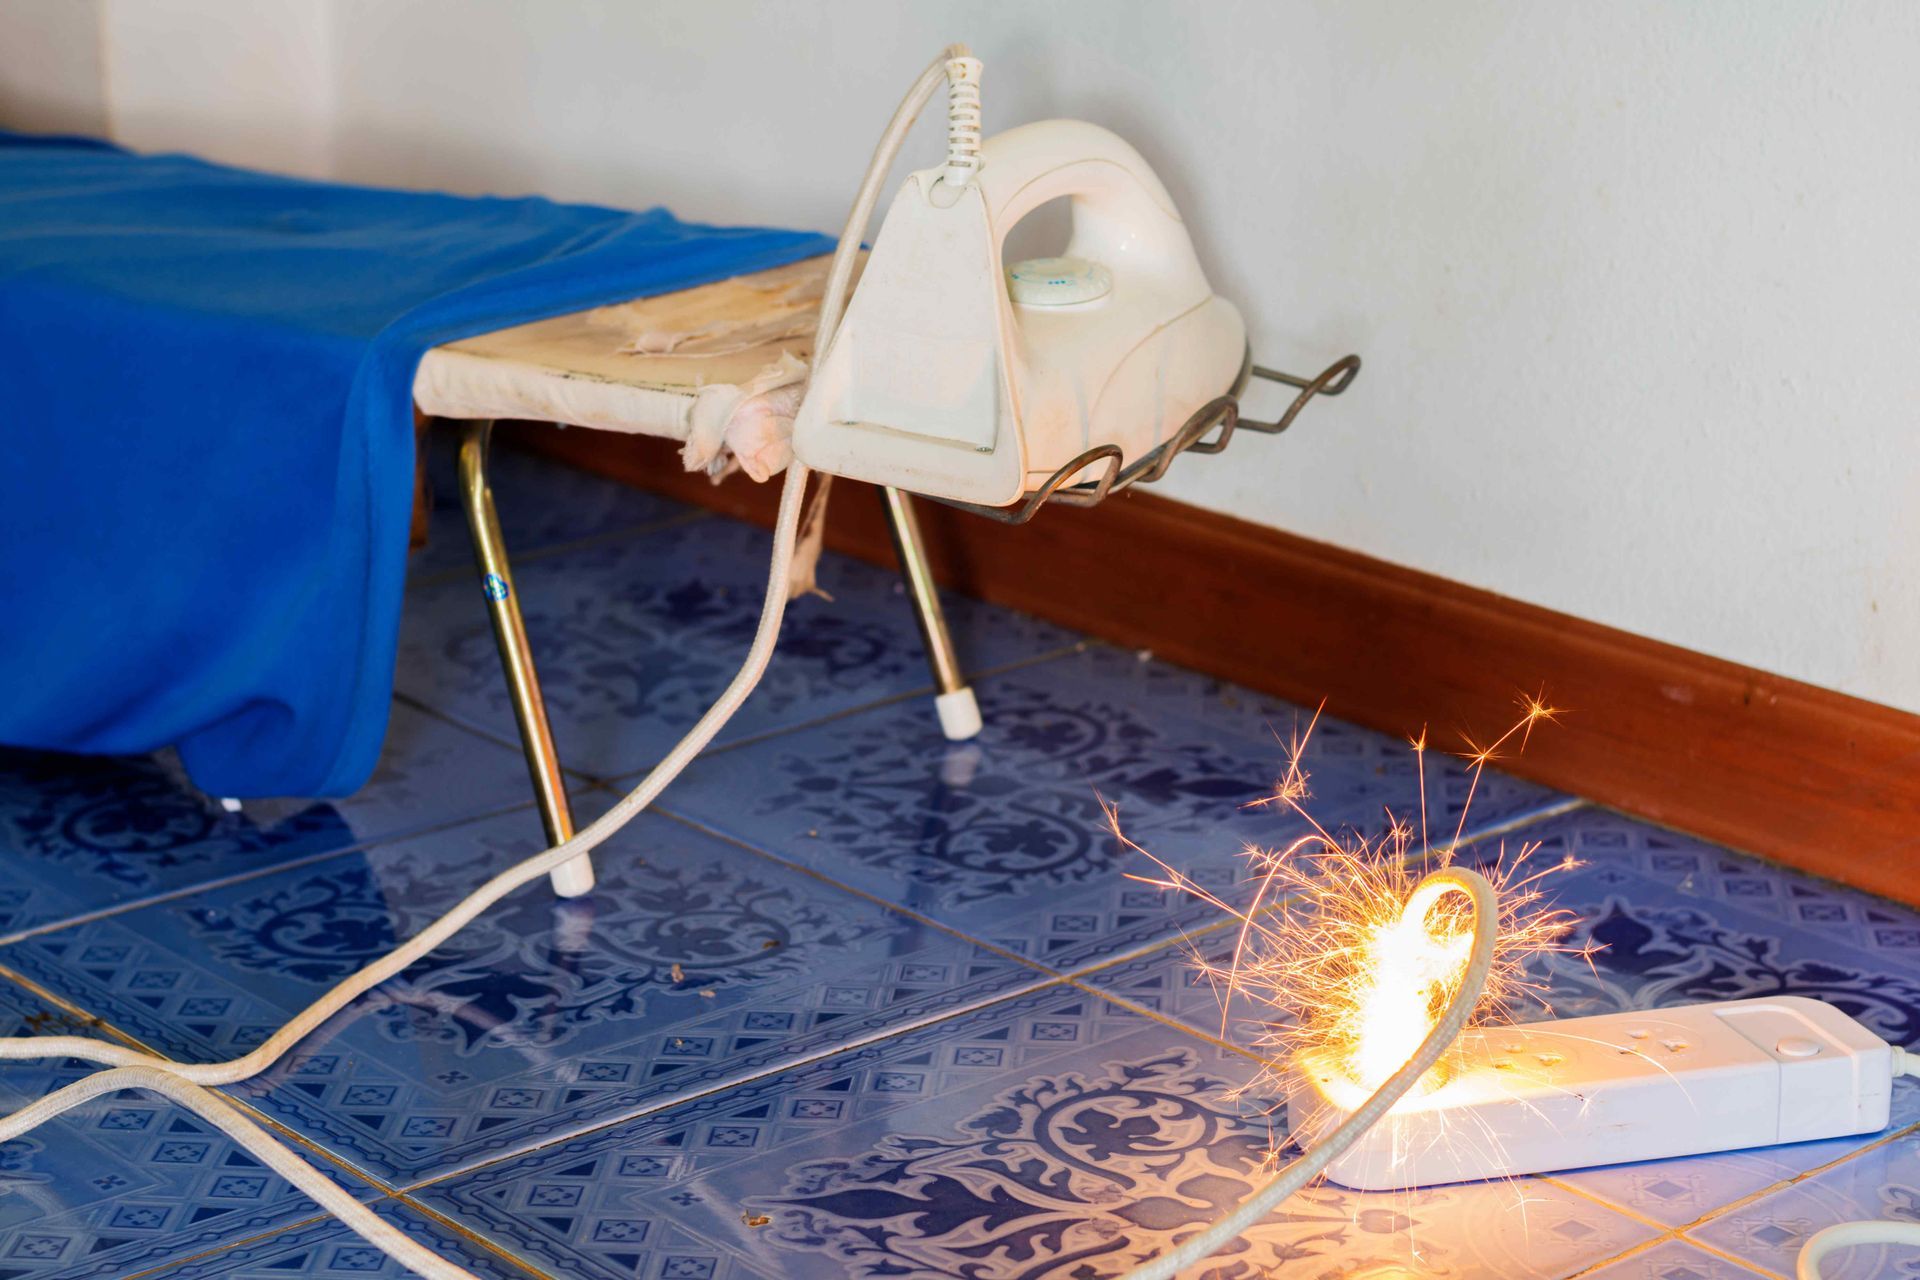 an iron plugged into a surge protector that is sparking and in flames